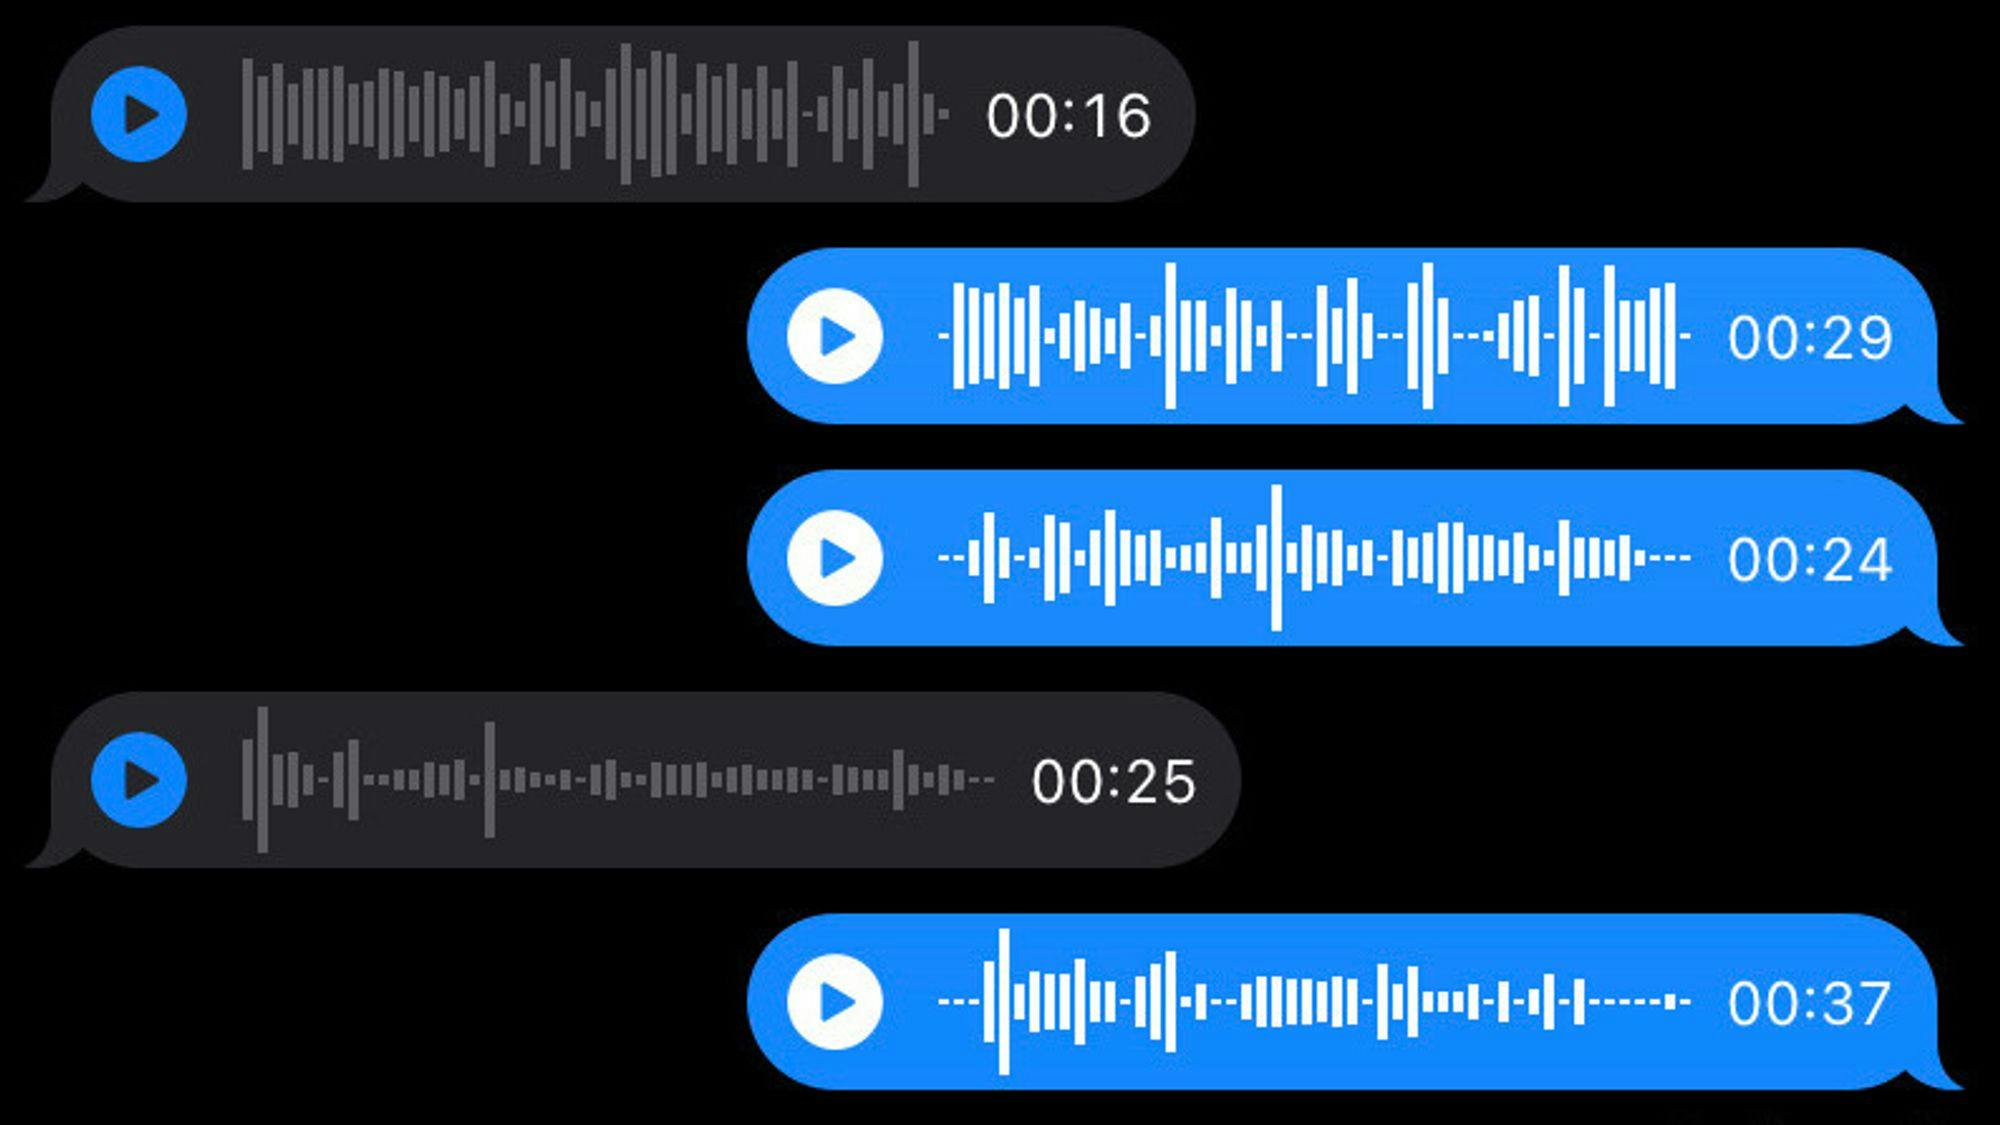 Are you getting more voice notes these days? You're not alone